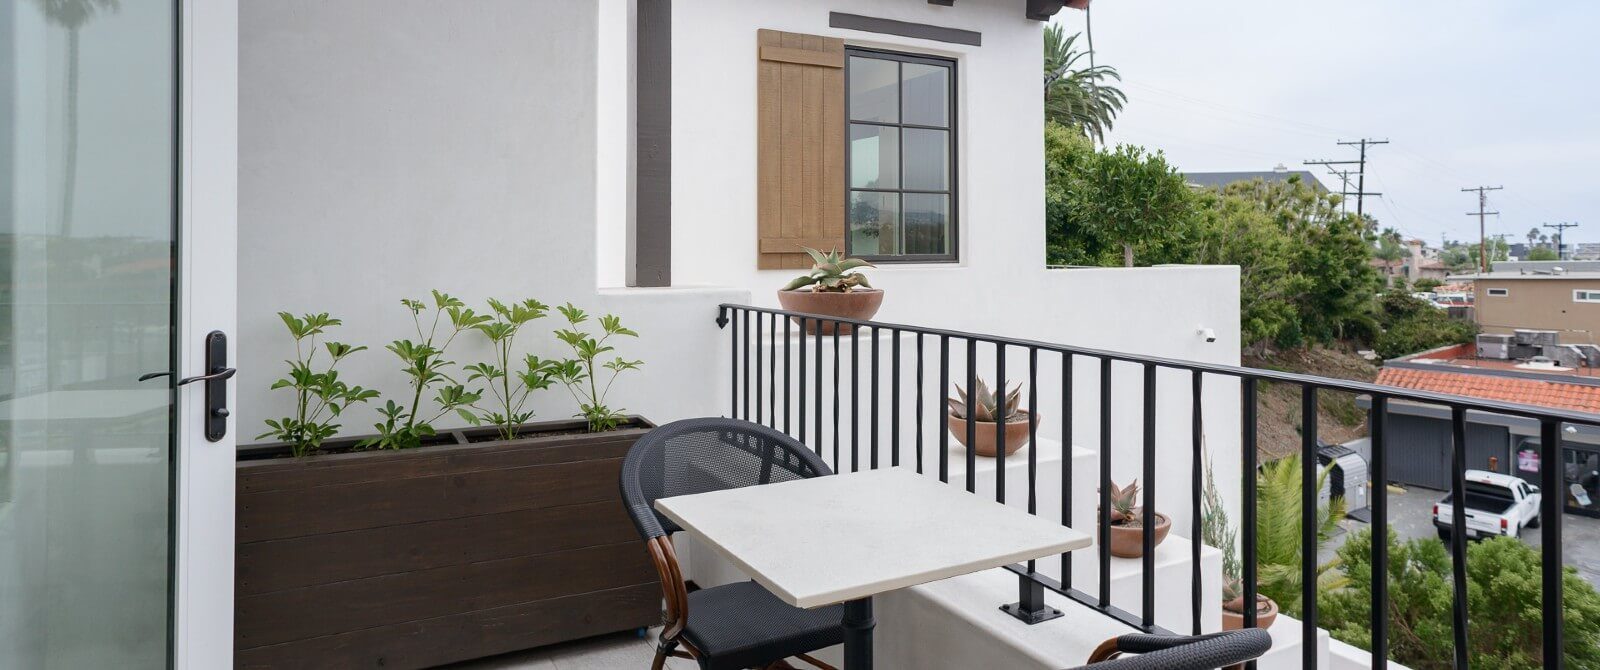 Spacious outdoor patio with table, two chairs, wrought iron railing and green plants